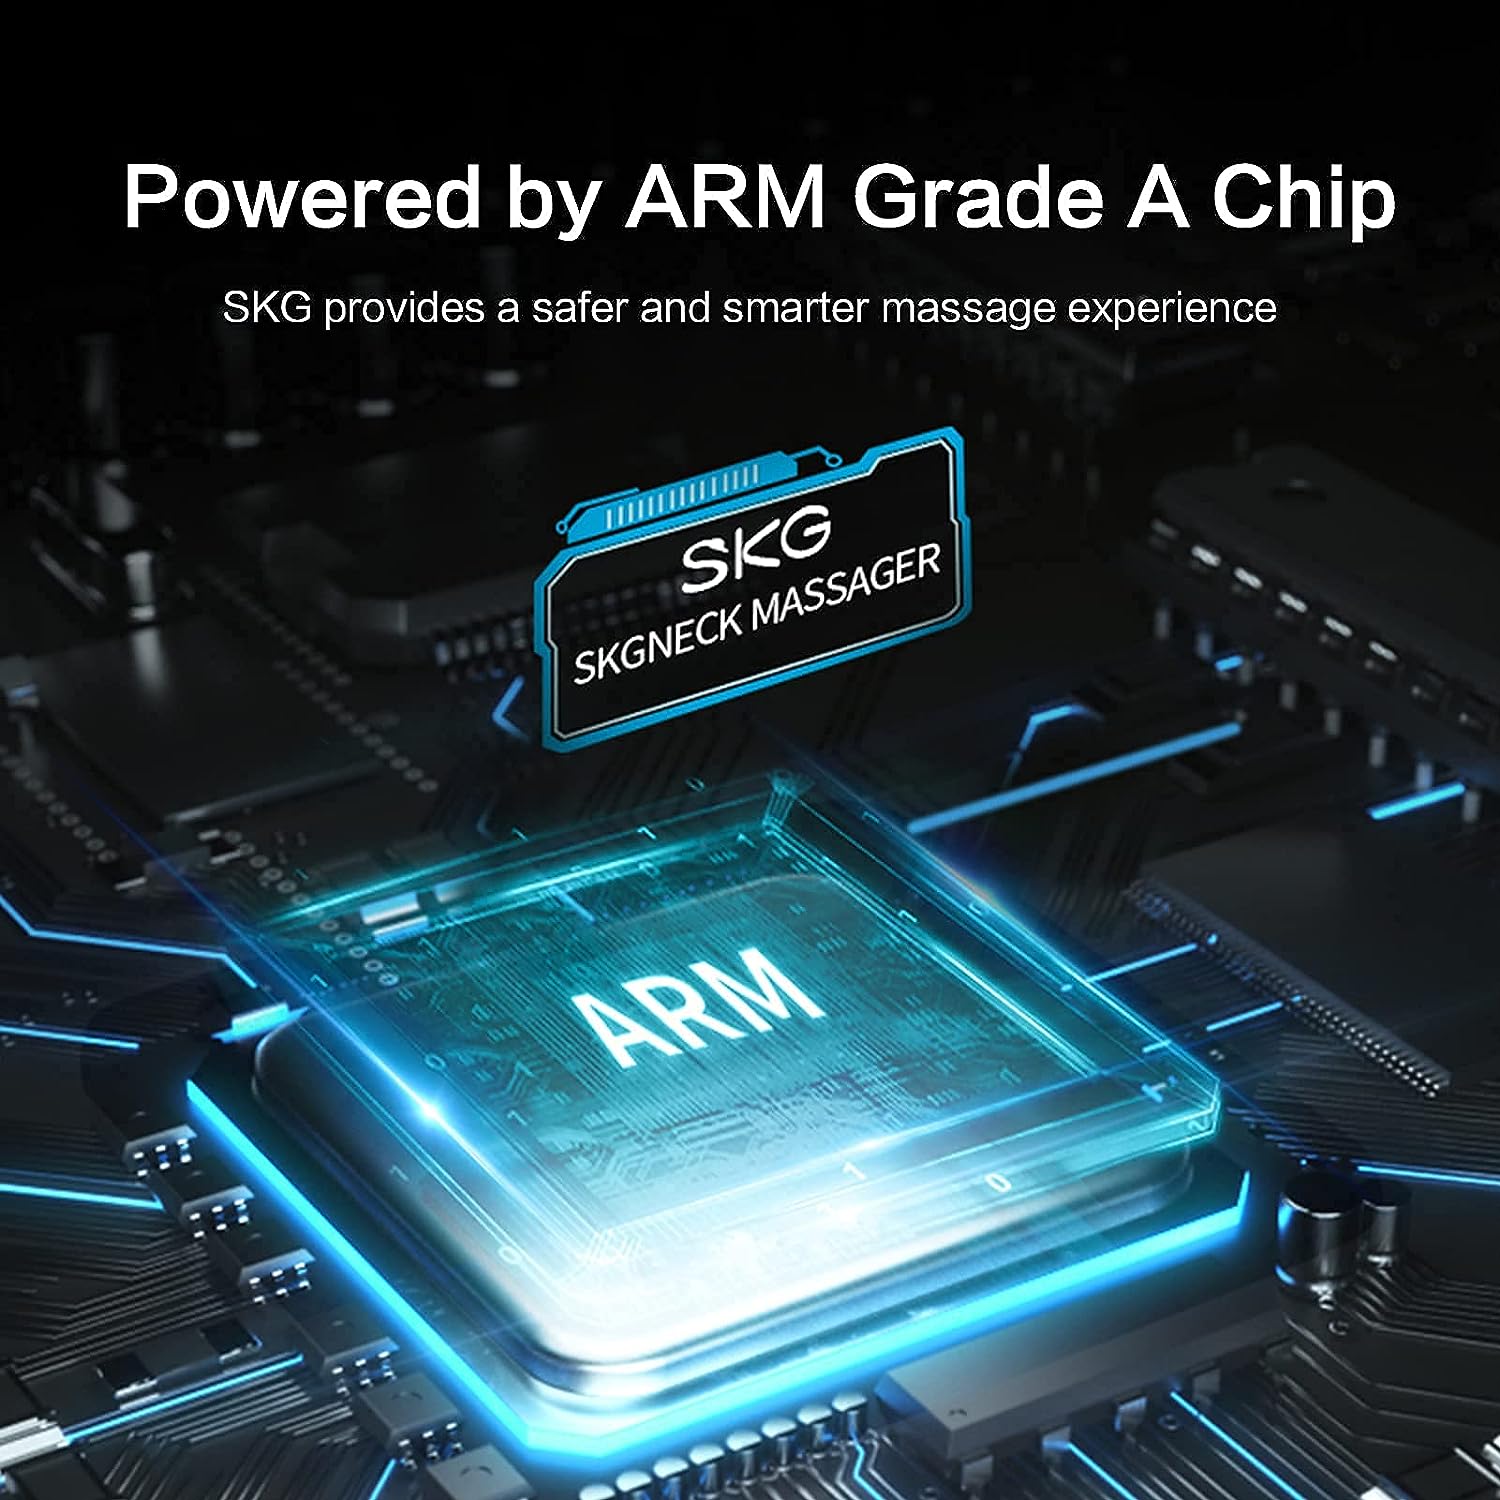 Powered by ARM Grade A Chip SKG provides a safer and smarter massage experience